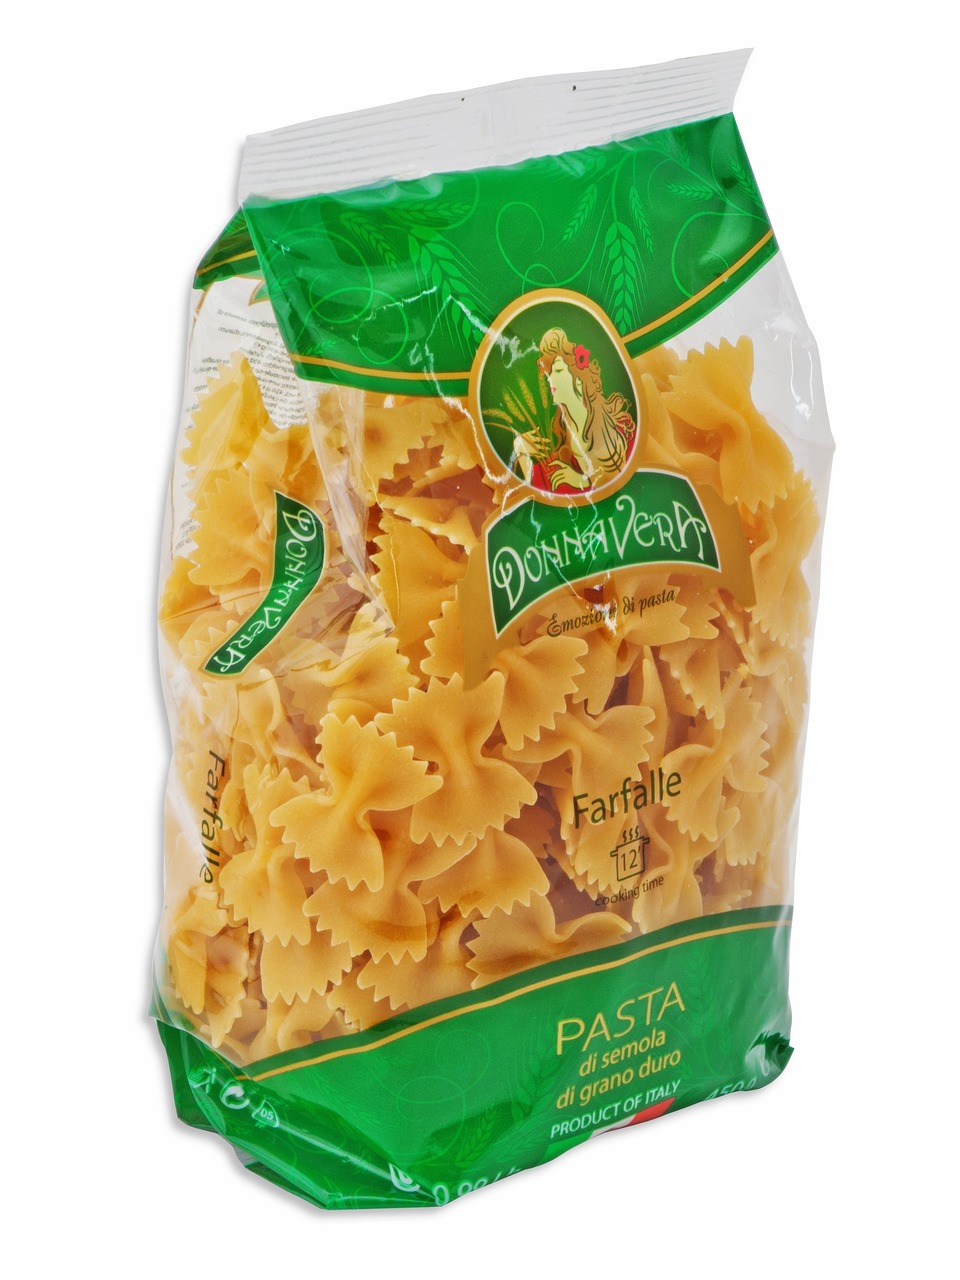 pasta products free pictures free photo